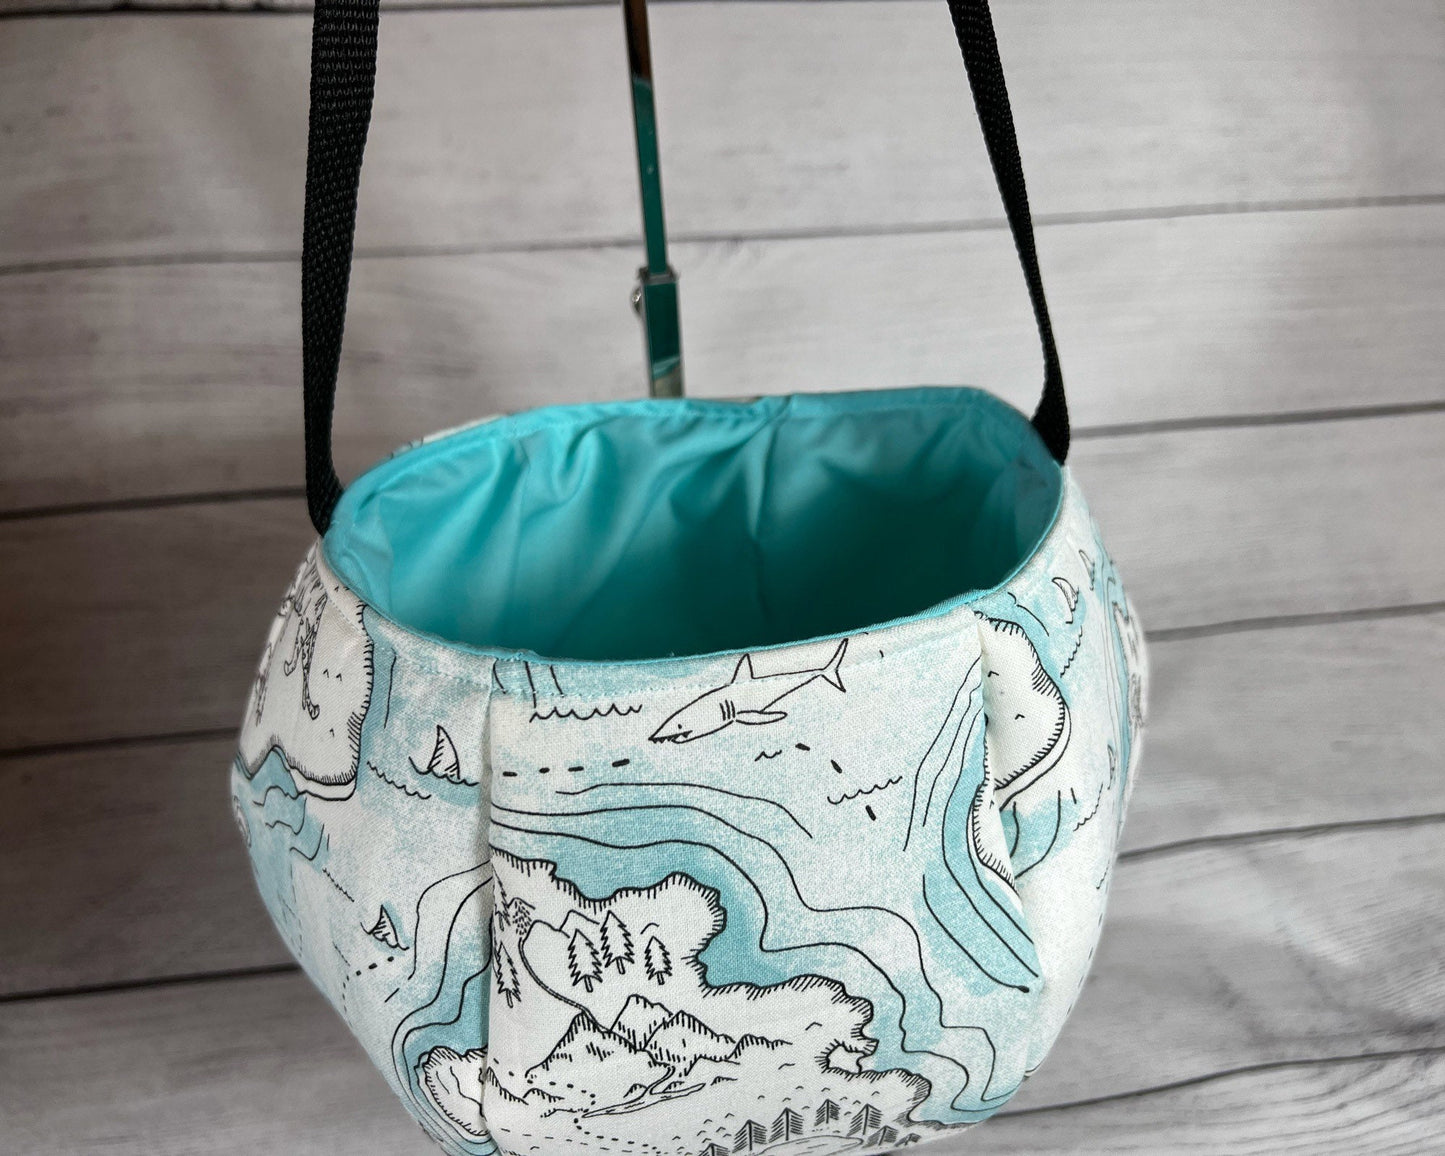 Ocean Map Tote Bag - Bag - Tote - X Marks the Spot - Sharks - Boats - Pirates - Party - Gift - Everyday - Holiday - Easter - Halloween